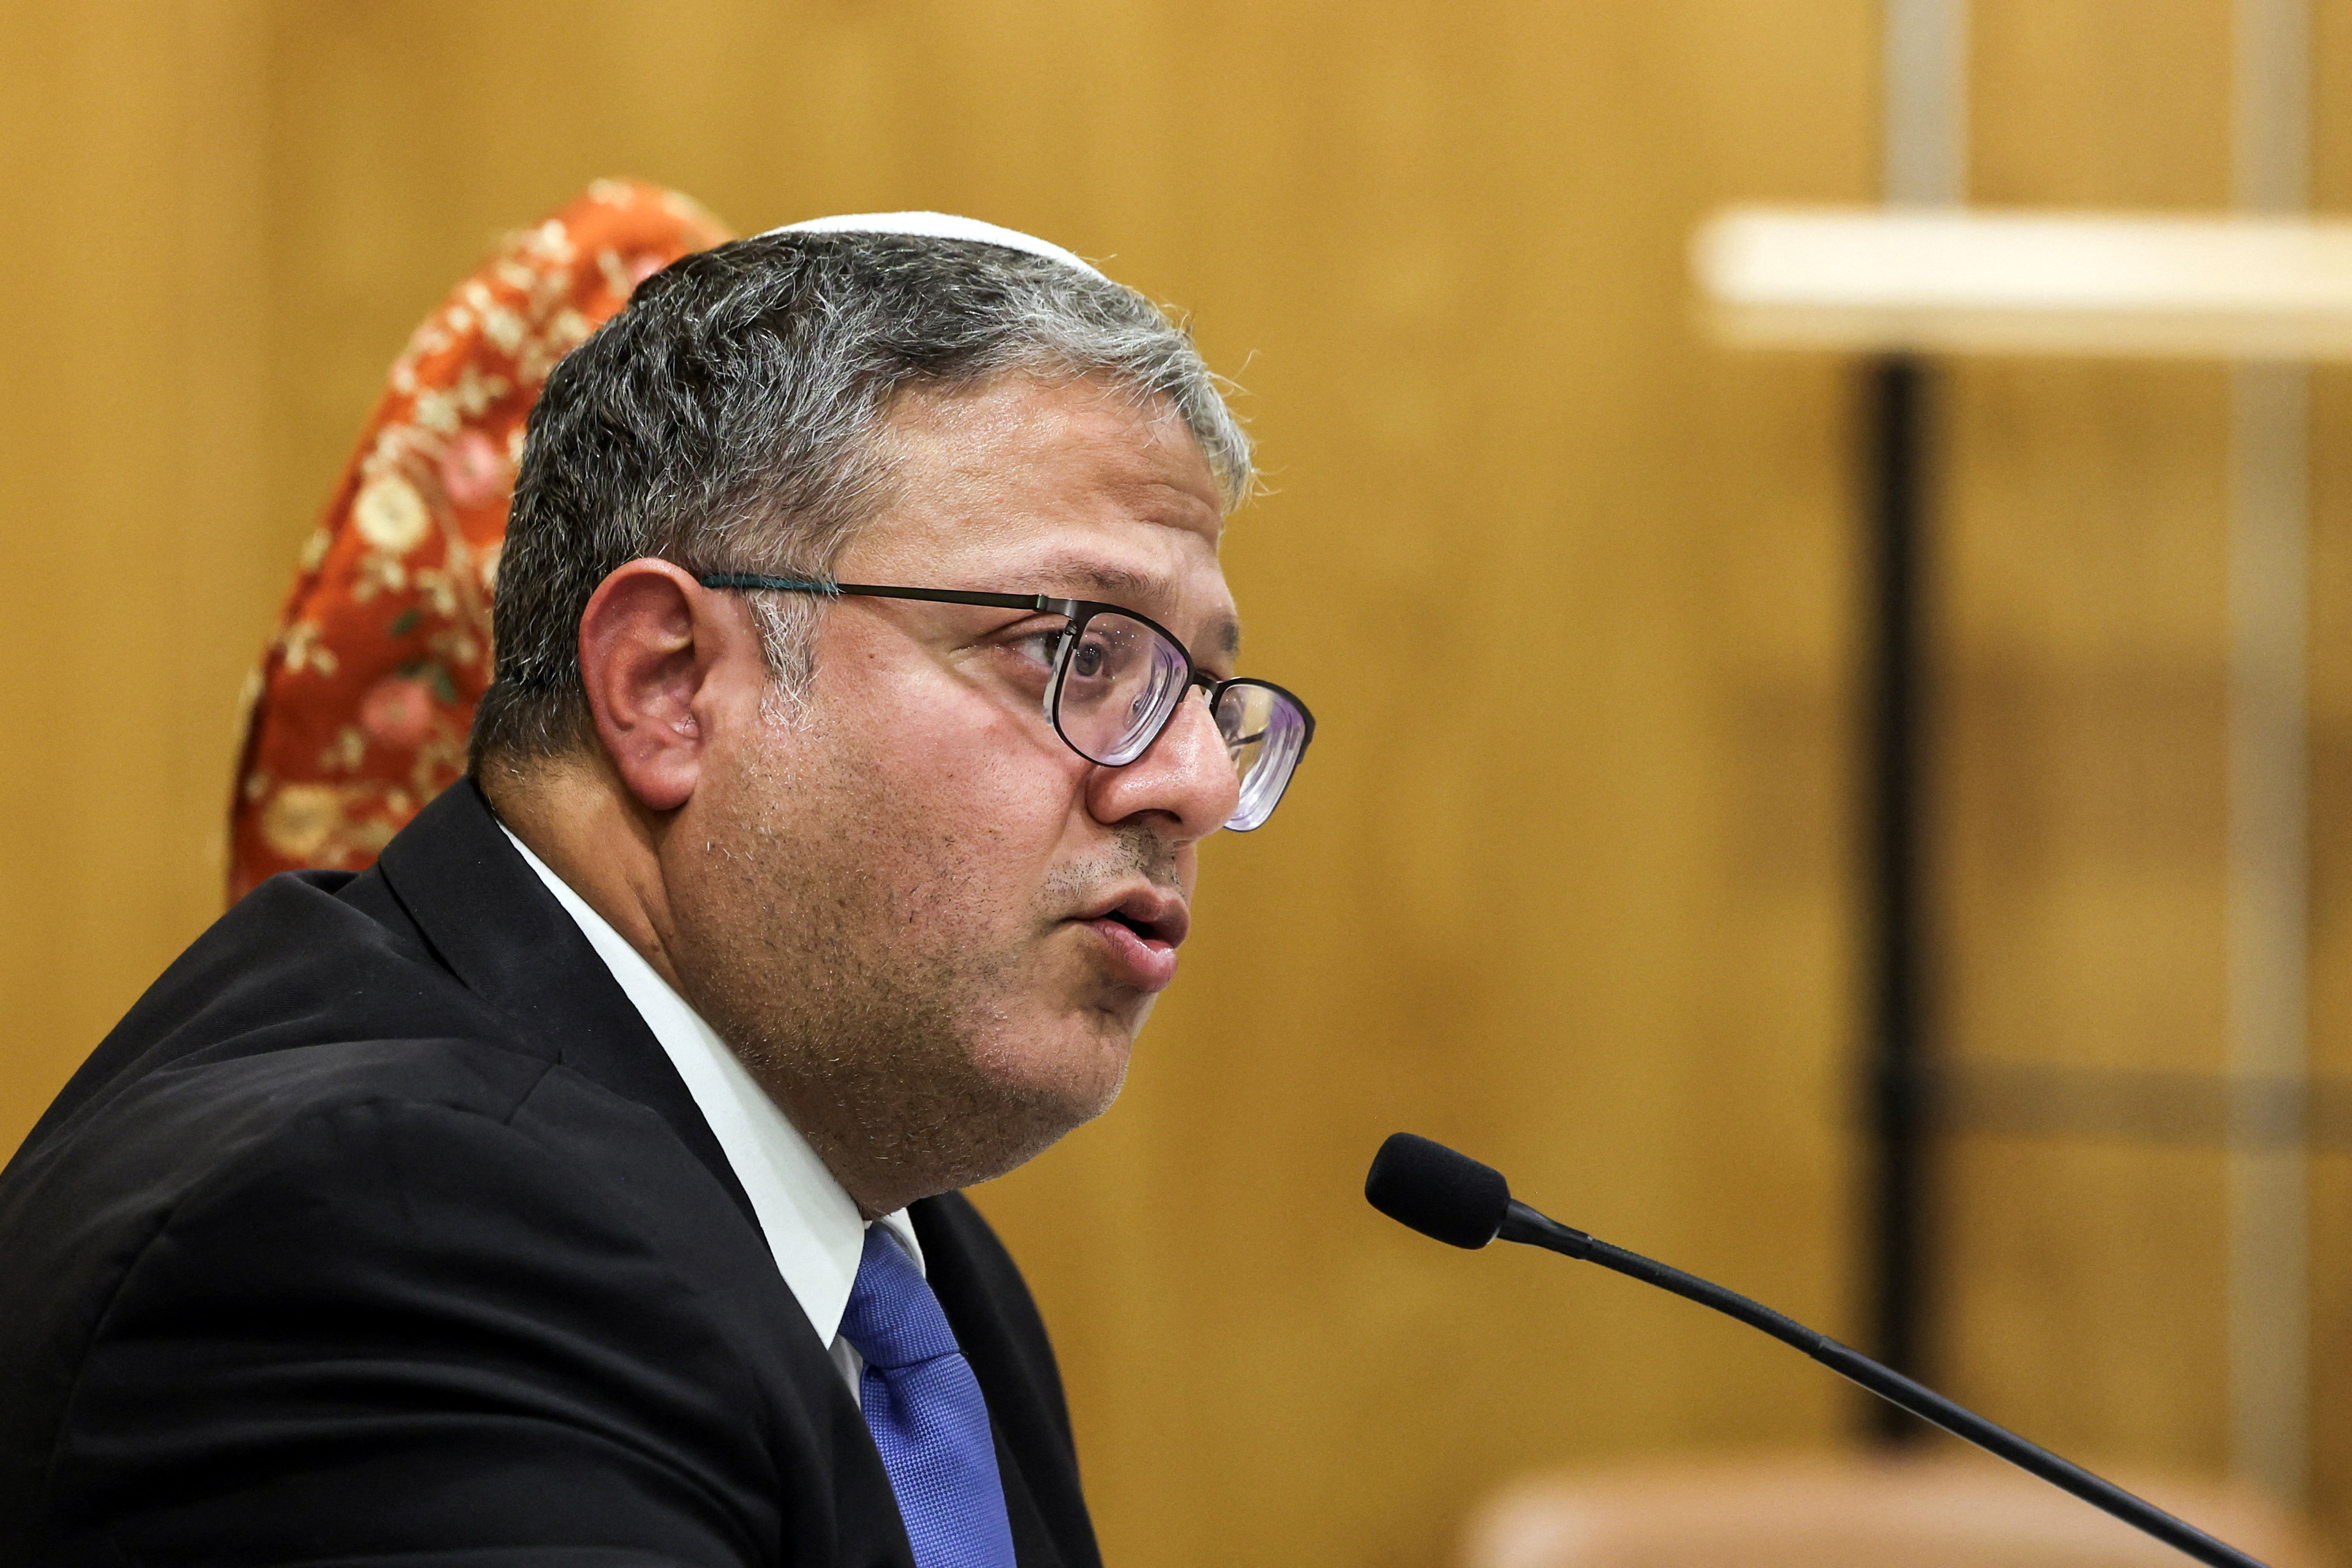 Israeli National Security Minister Itamar Ben-Gvir attends his party faction meeting at the Knesset, Israel's parliament, in Jerusalem